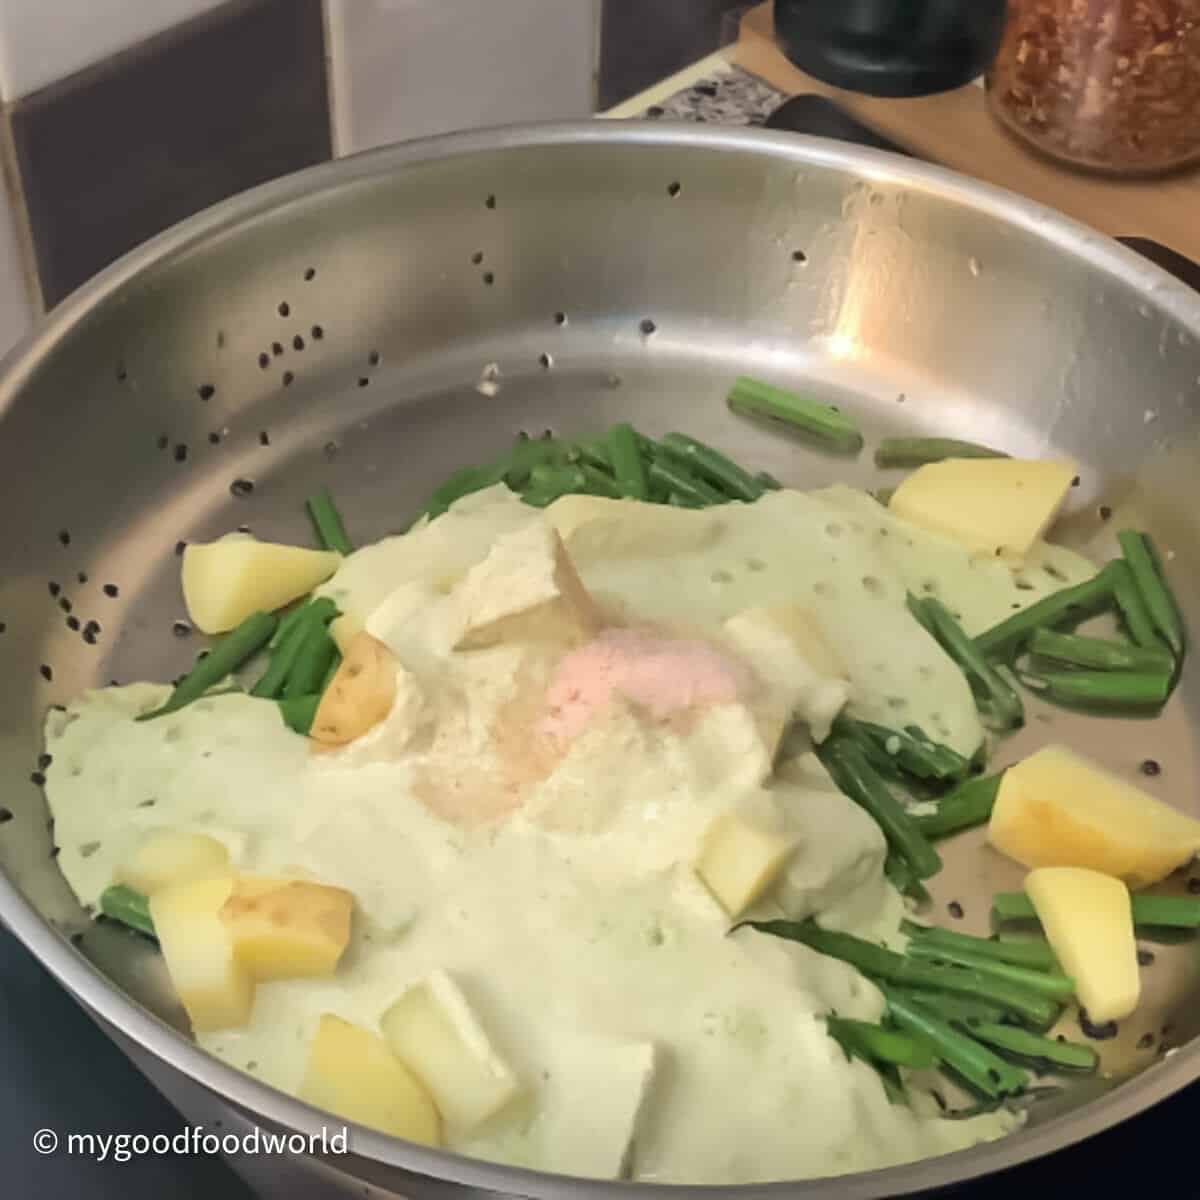 A photo of a skillet with a creamy sauce, green beans, and potatoes cooking on a stovetop.